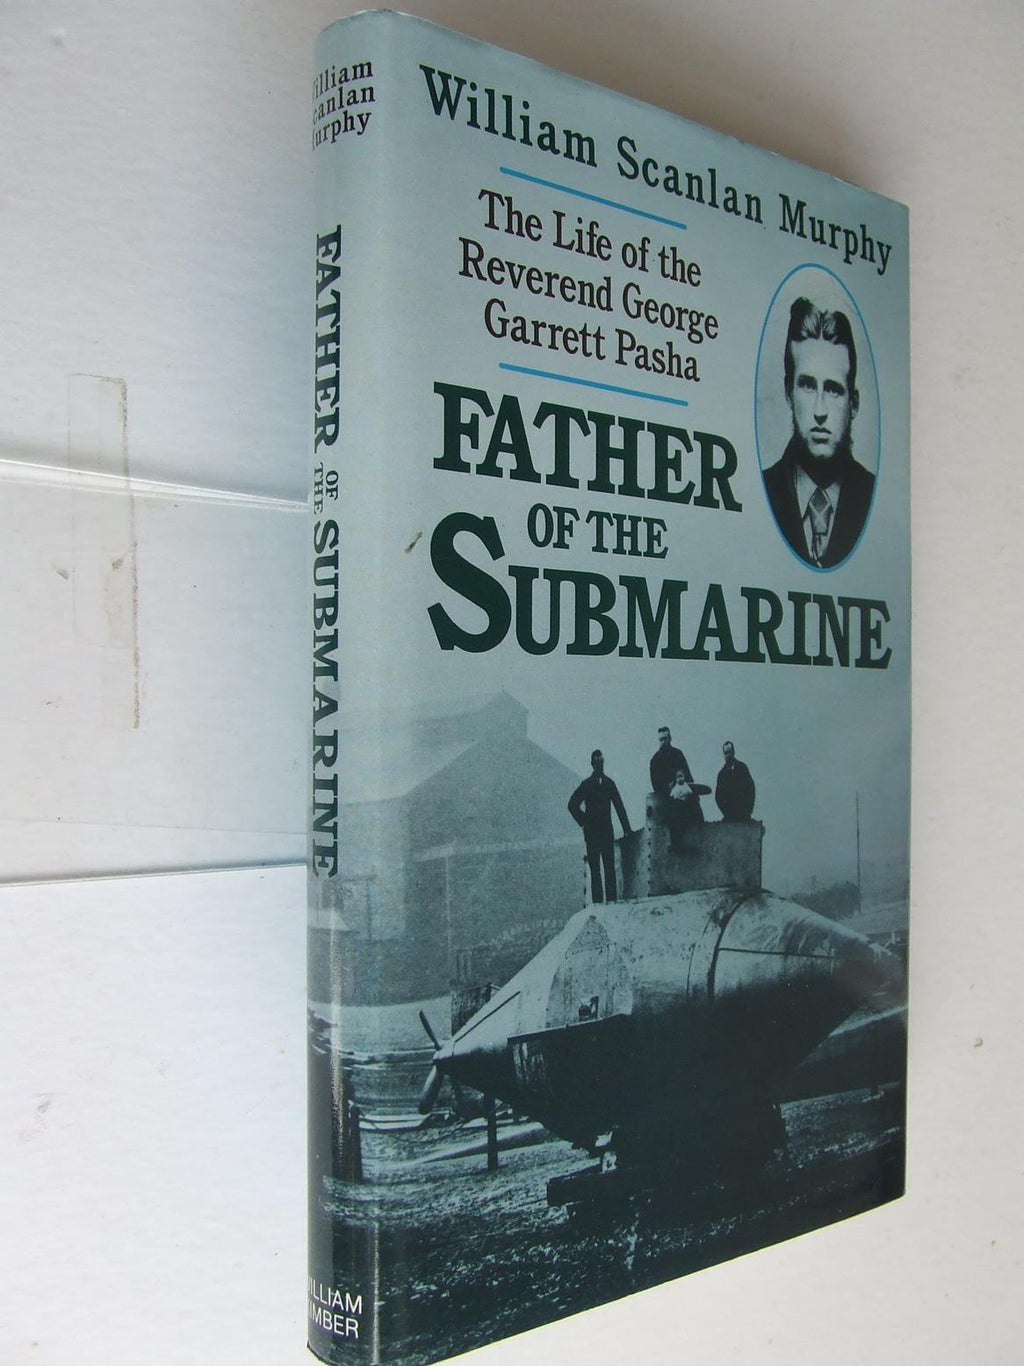 FATHER OF THE SUBMARINE, the life of the Reverend George Garrett Pasha